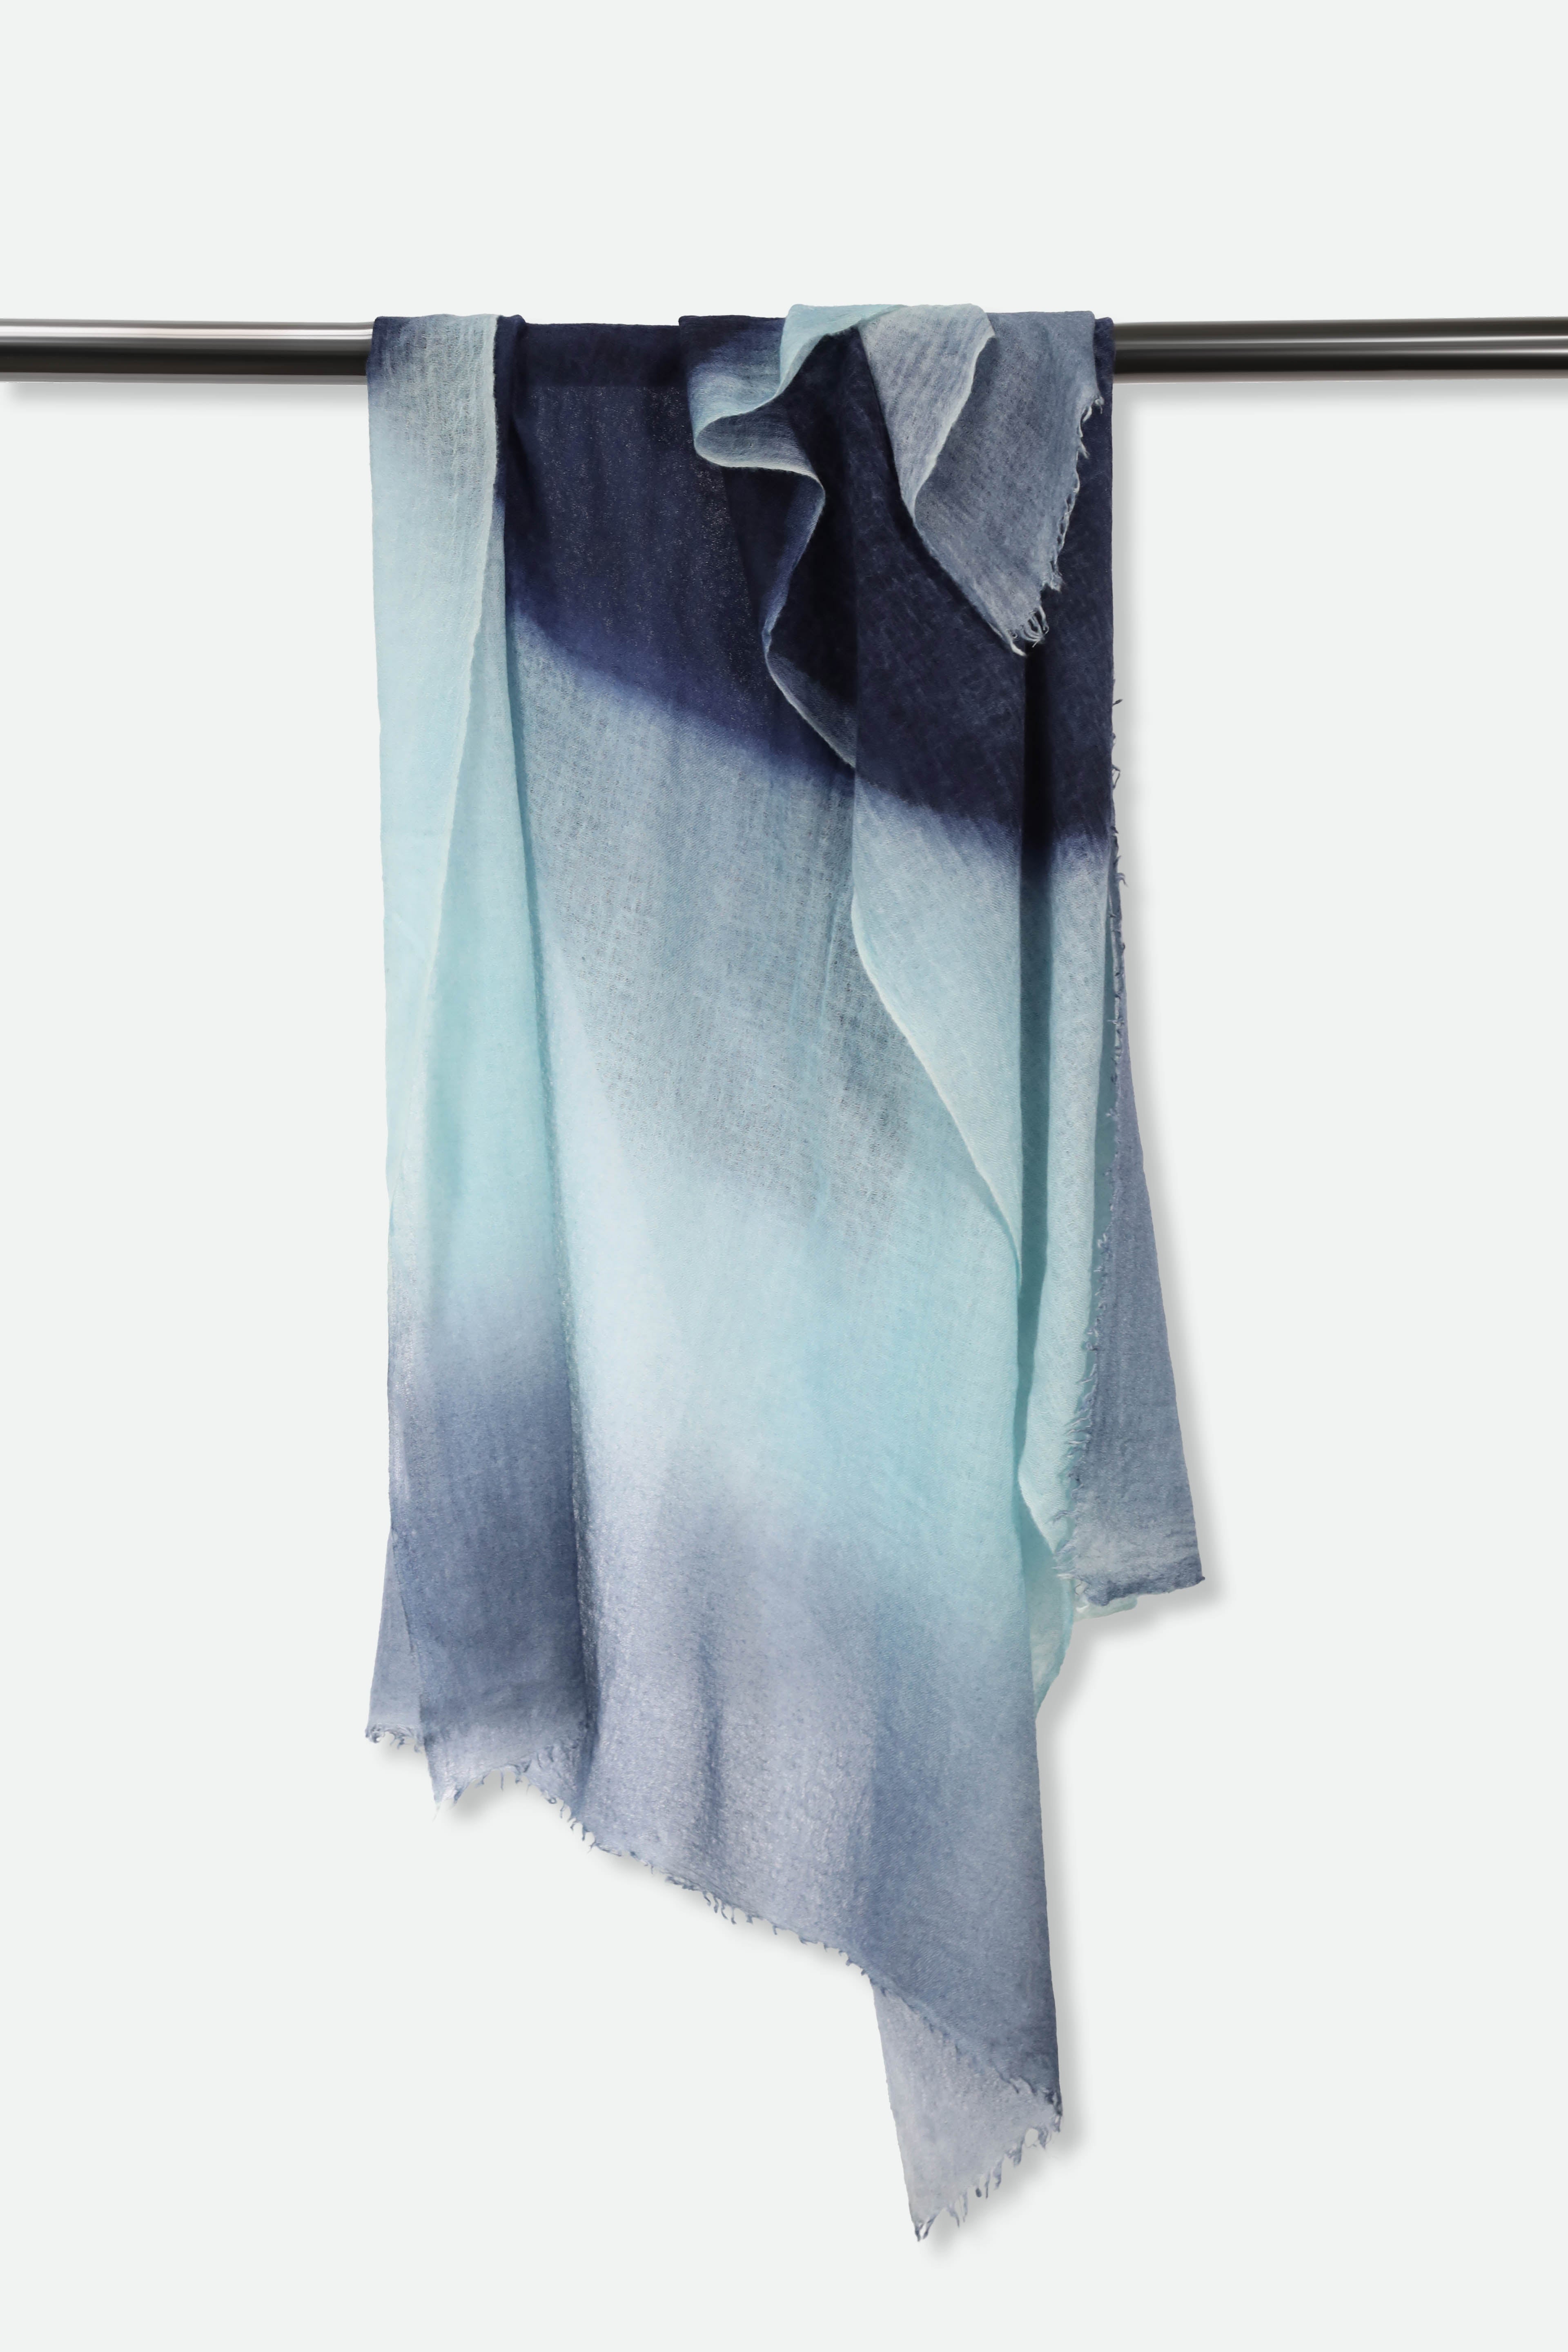 NAVY DEEP SCARF IN HAND DYED CASHMERE - Jarbo